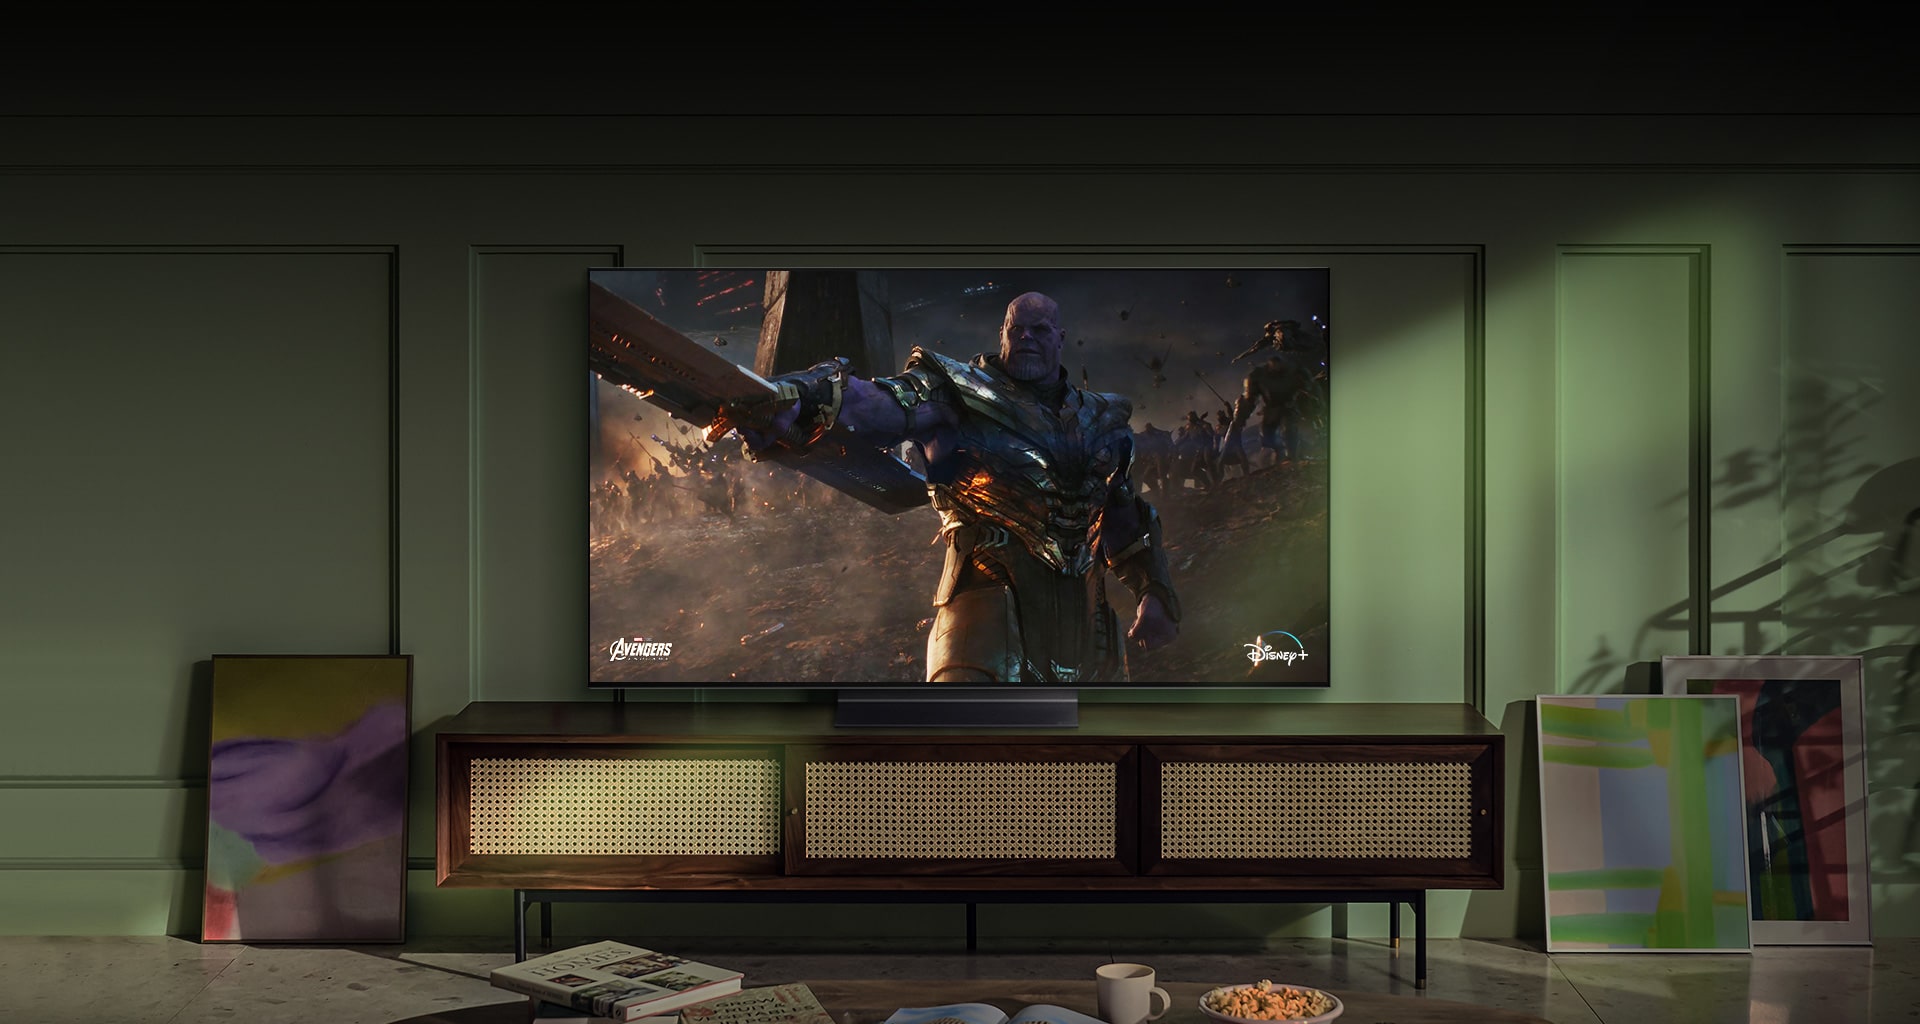 A large wall-mounted LG OLED television shows an action movie scene